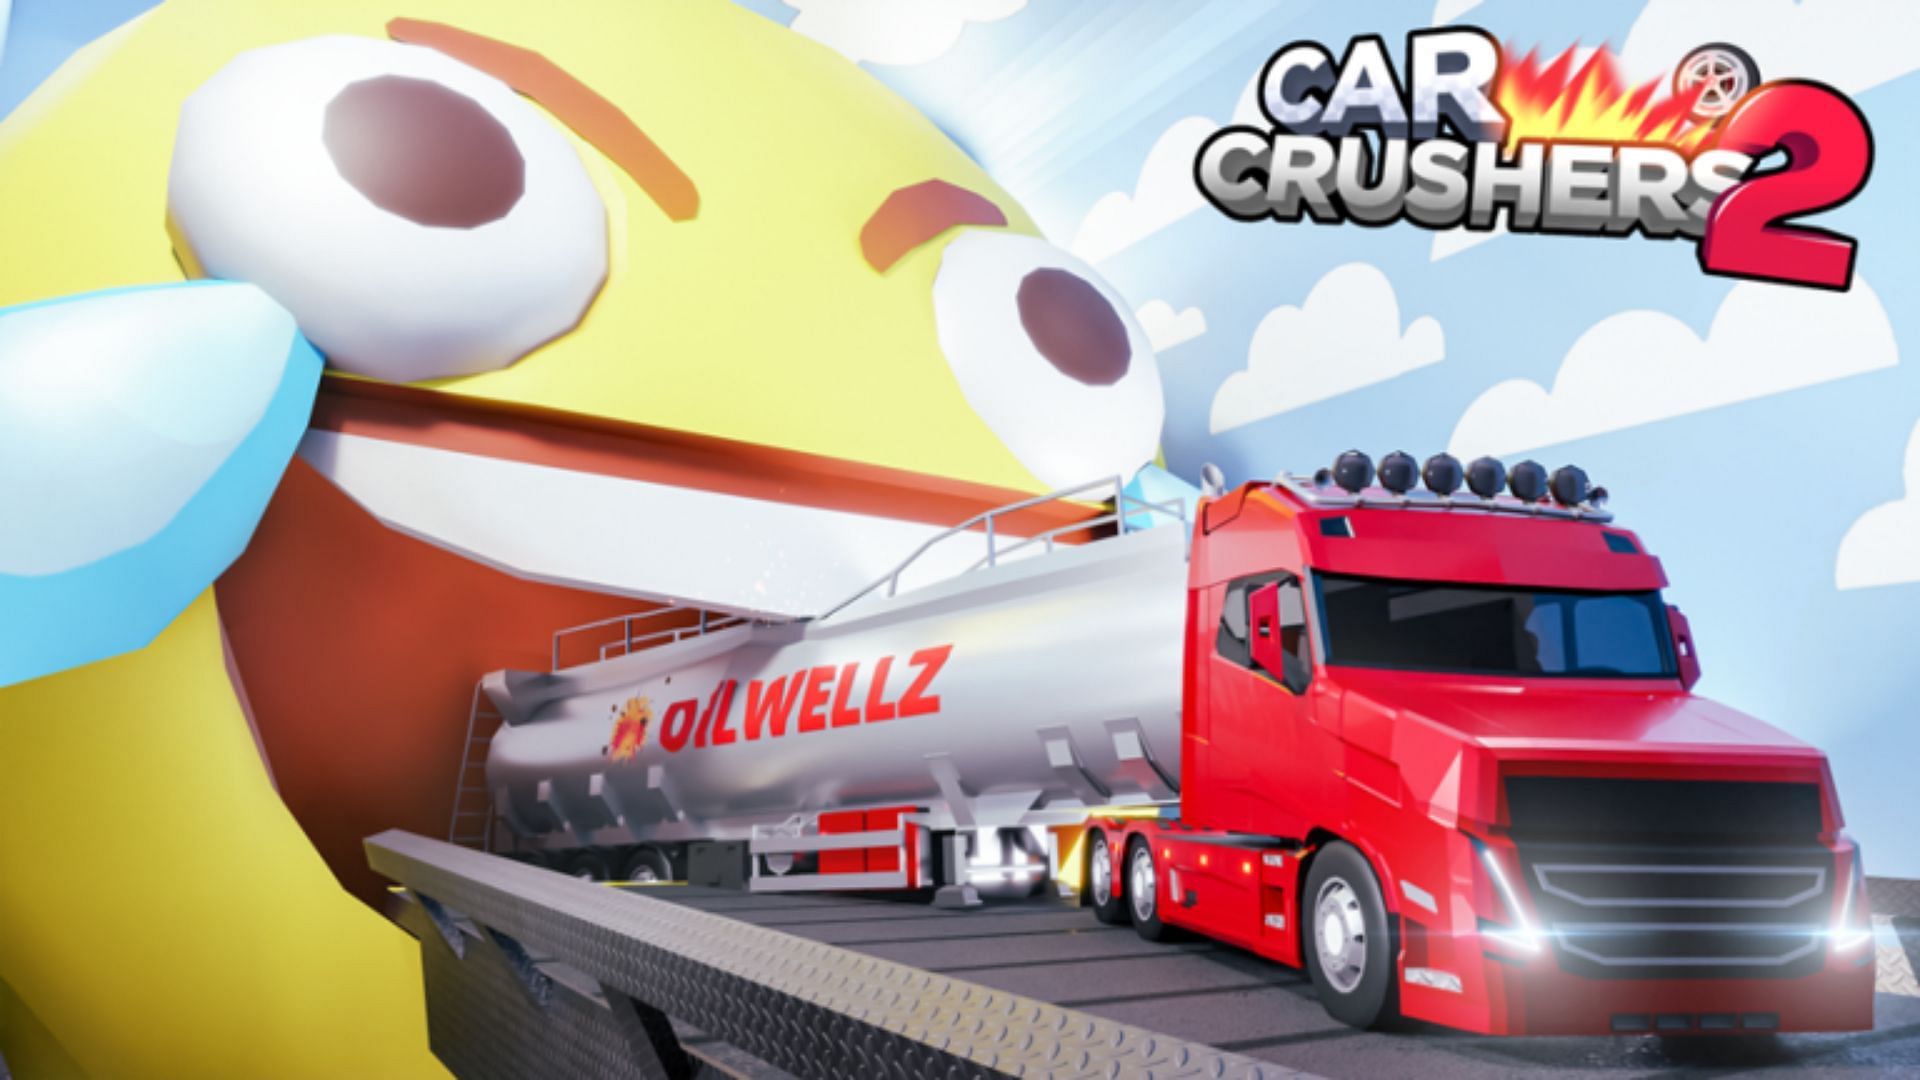 Codes for Car Crushers 2 and their importance (Image via Roblox)